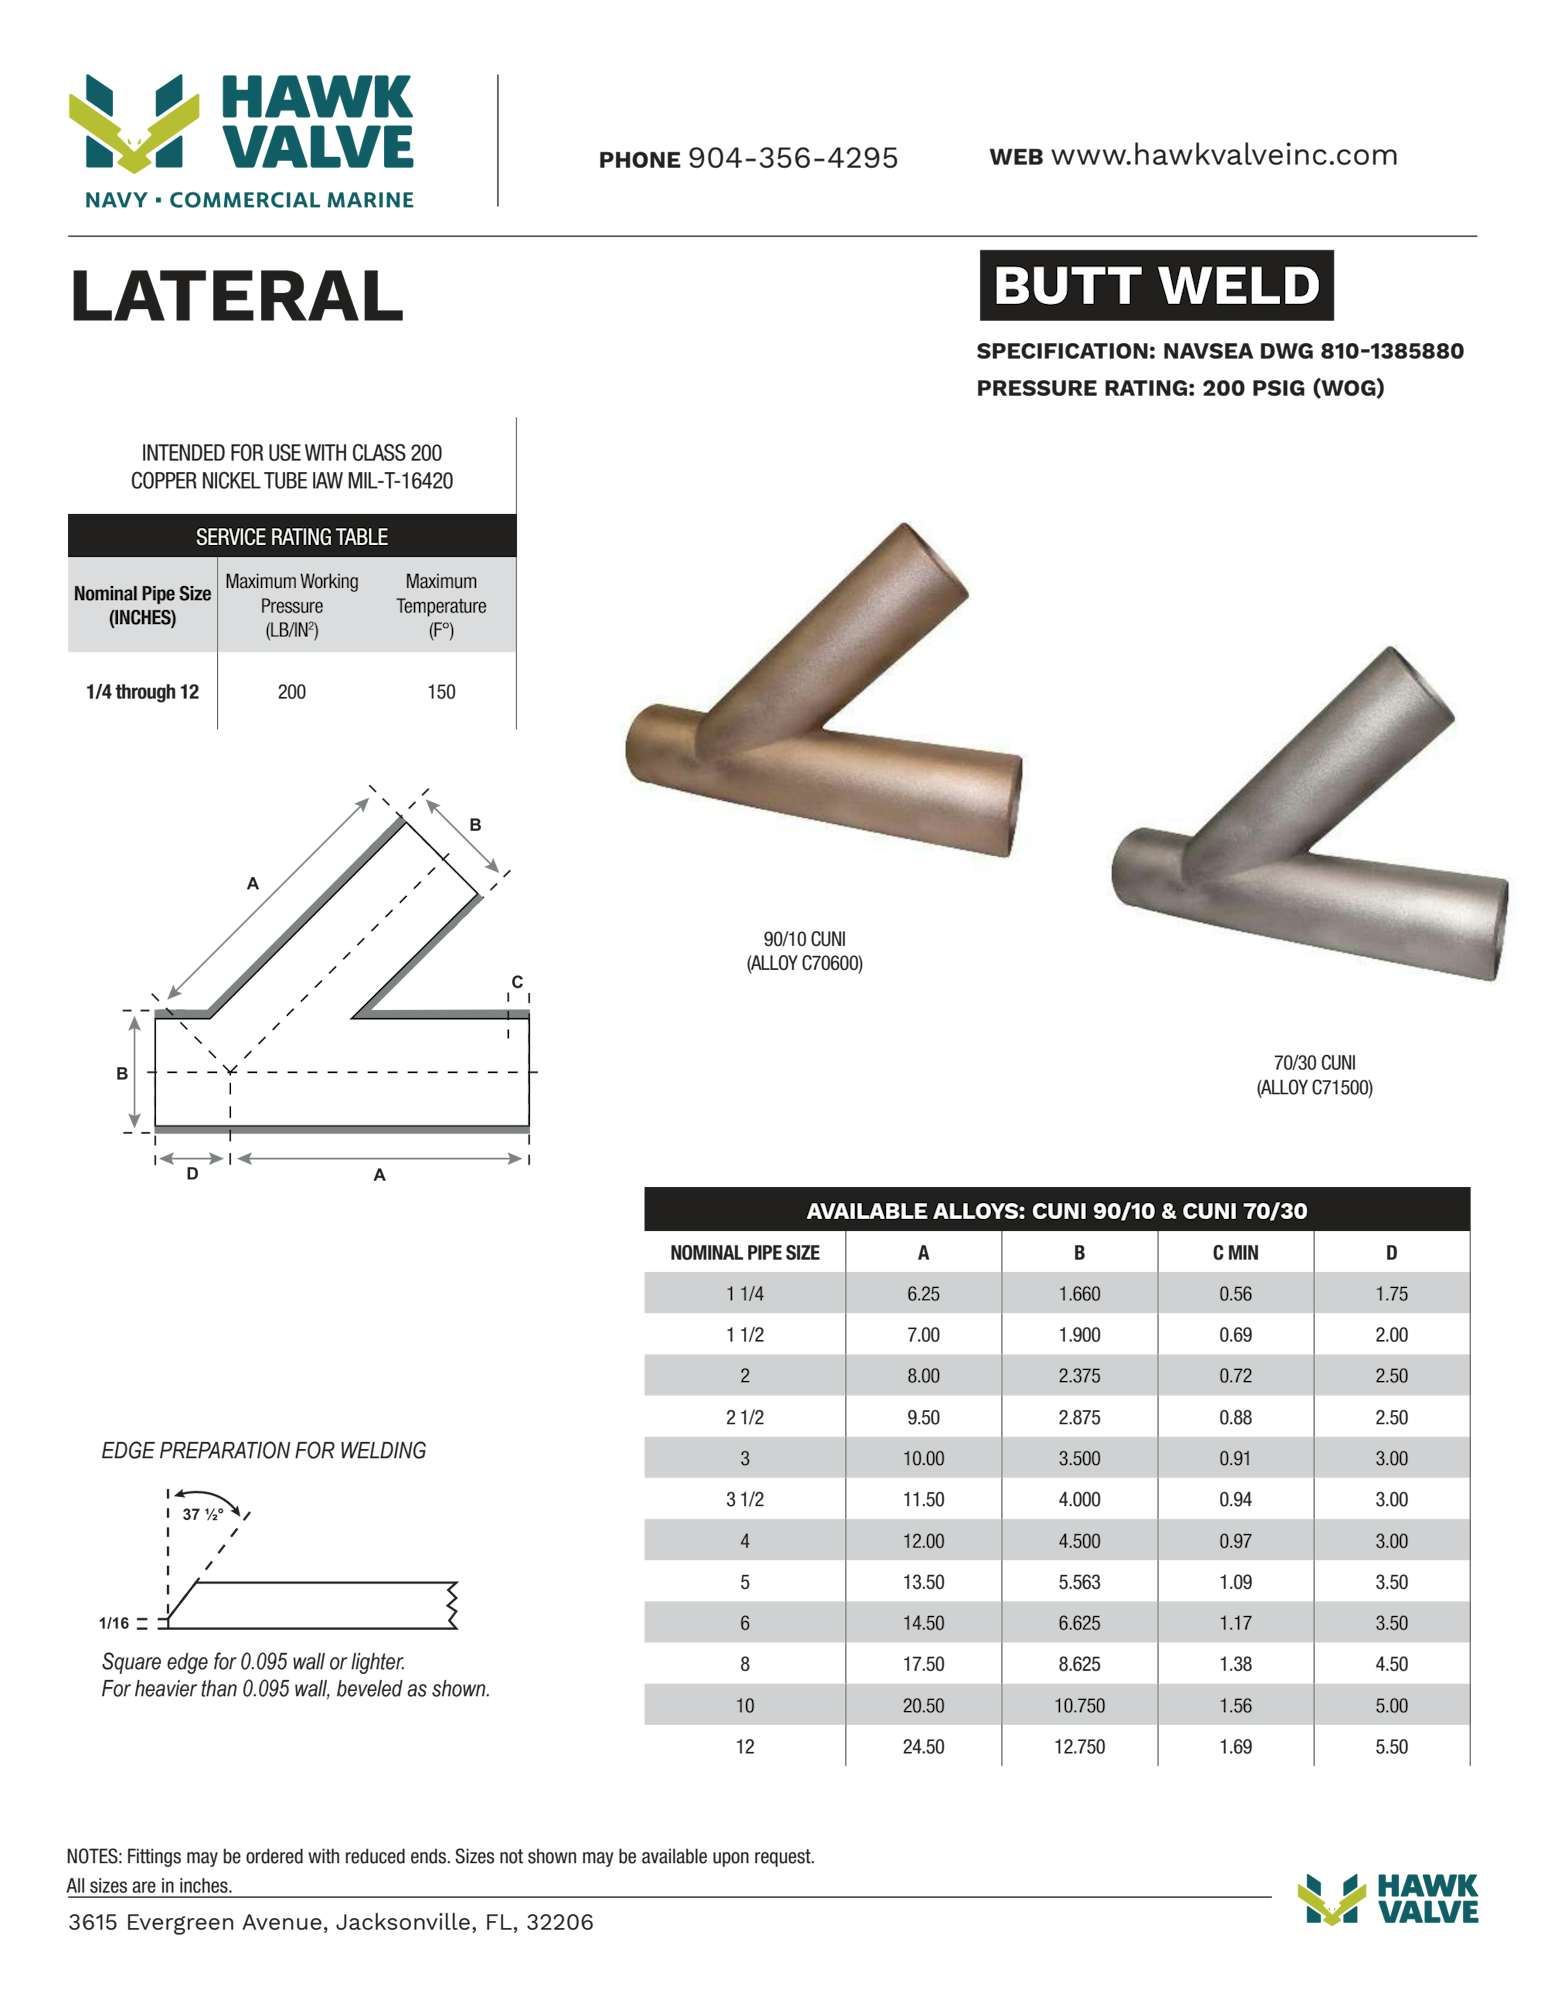 BUTT-WELD-LATERAL.pdf